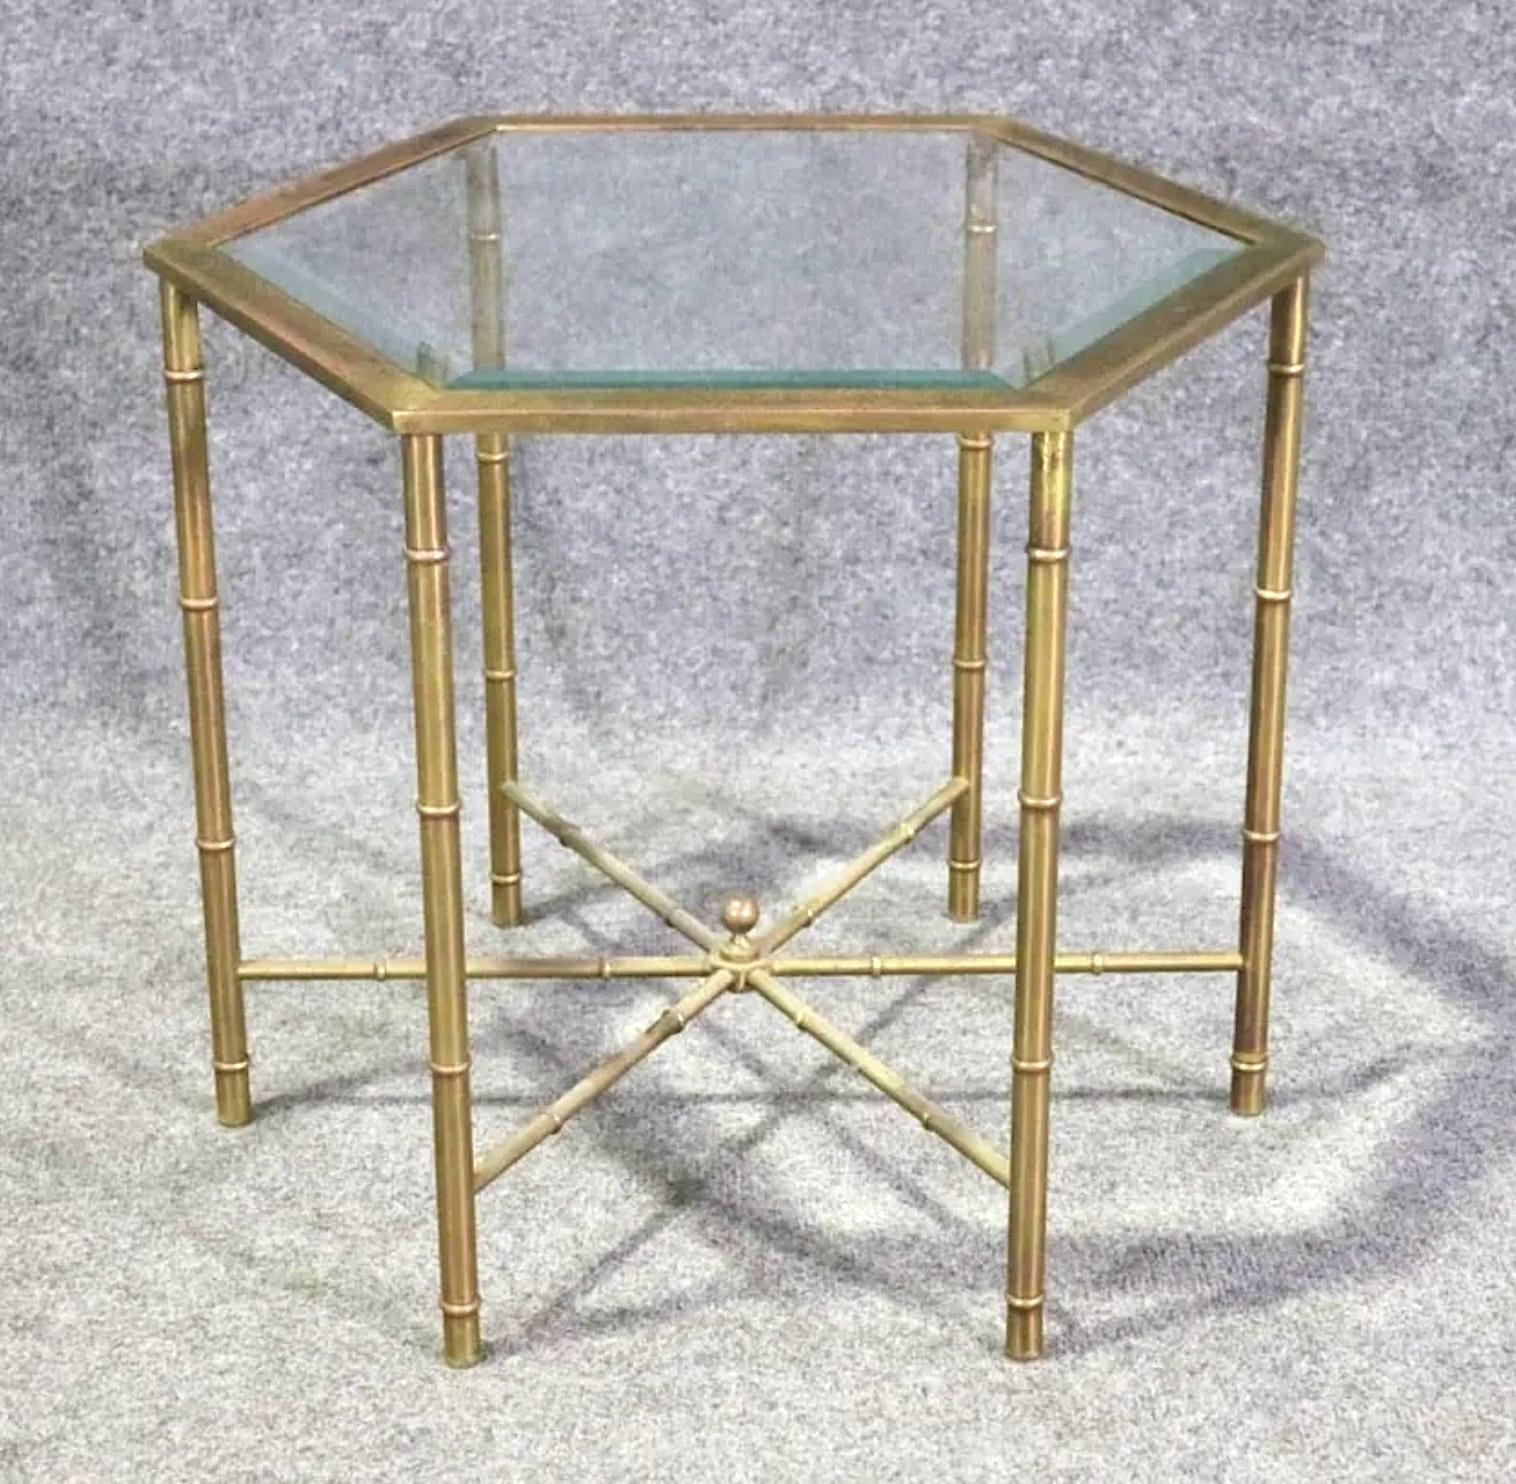 This mid-century modern side table was made by Mastercraft. Featuring a bamboo style brass frame with inset glass top.
Please confirm location NY or NJ